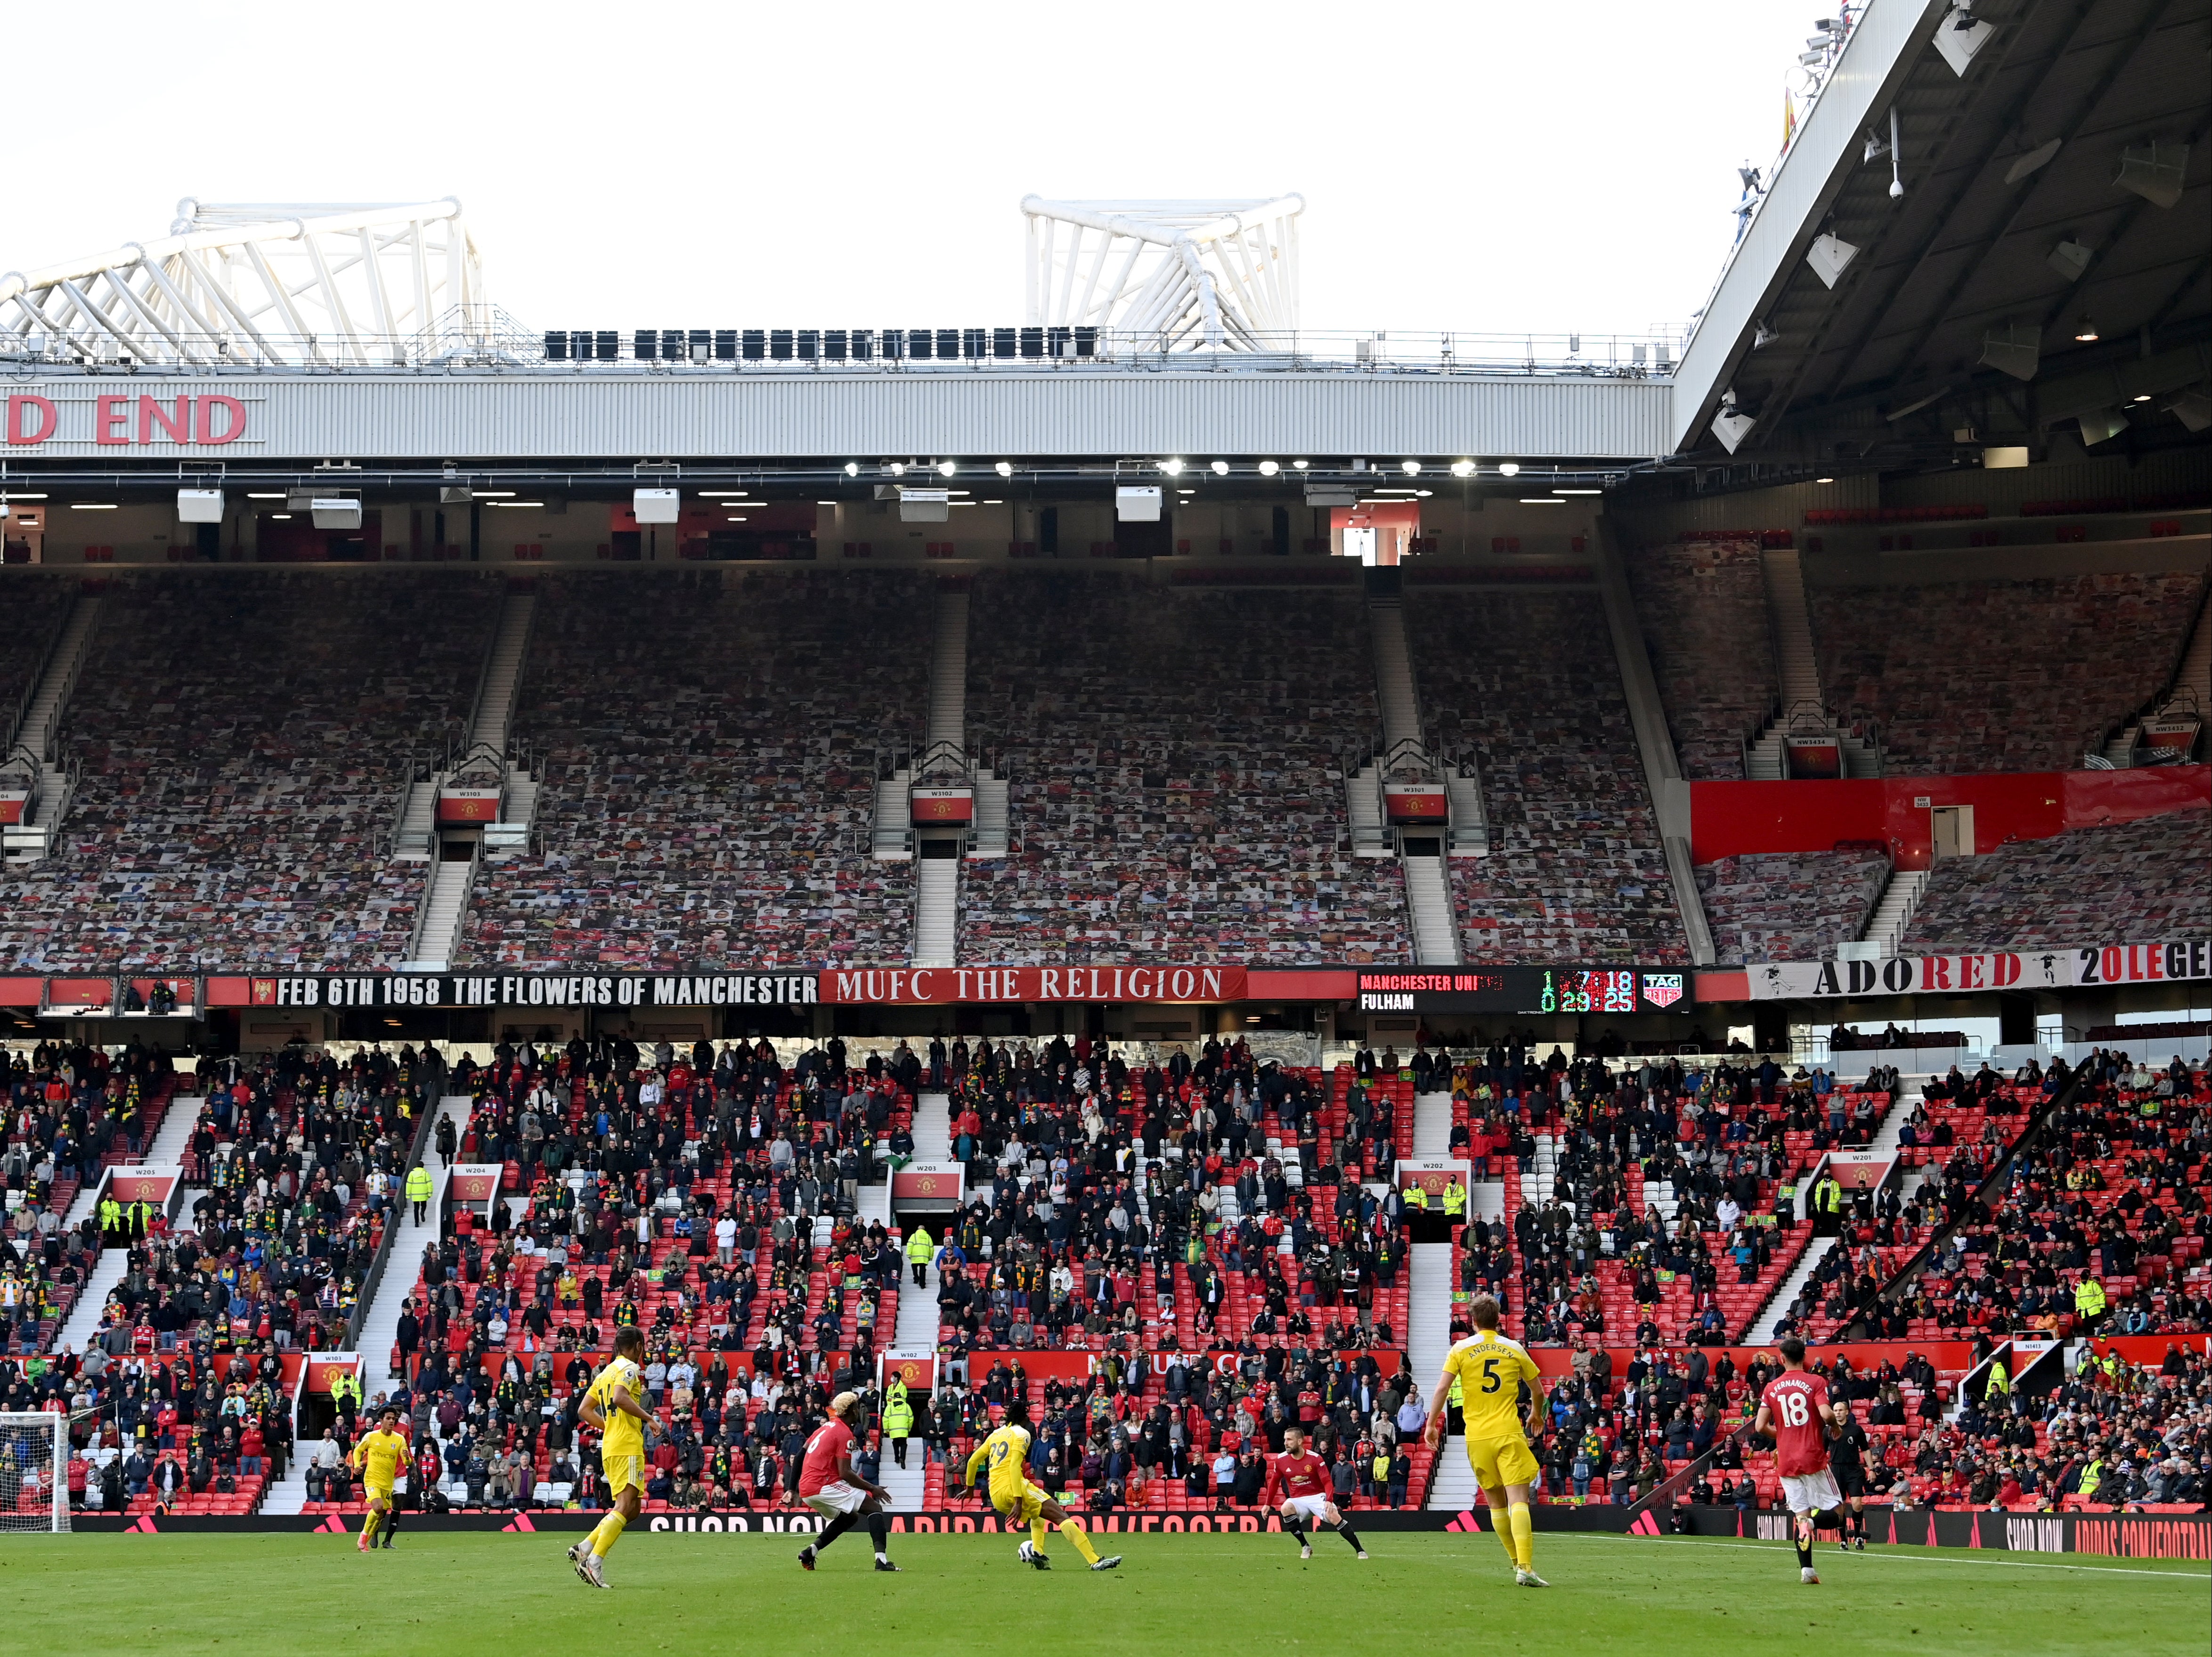 Manchester United play a Premier League match at Old Trafford in Manchester